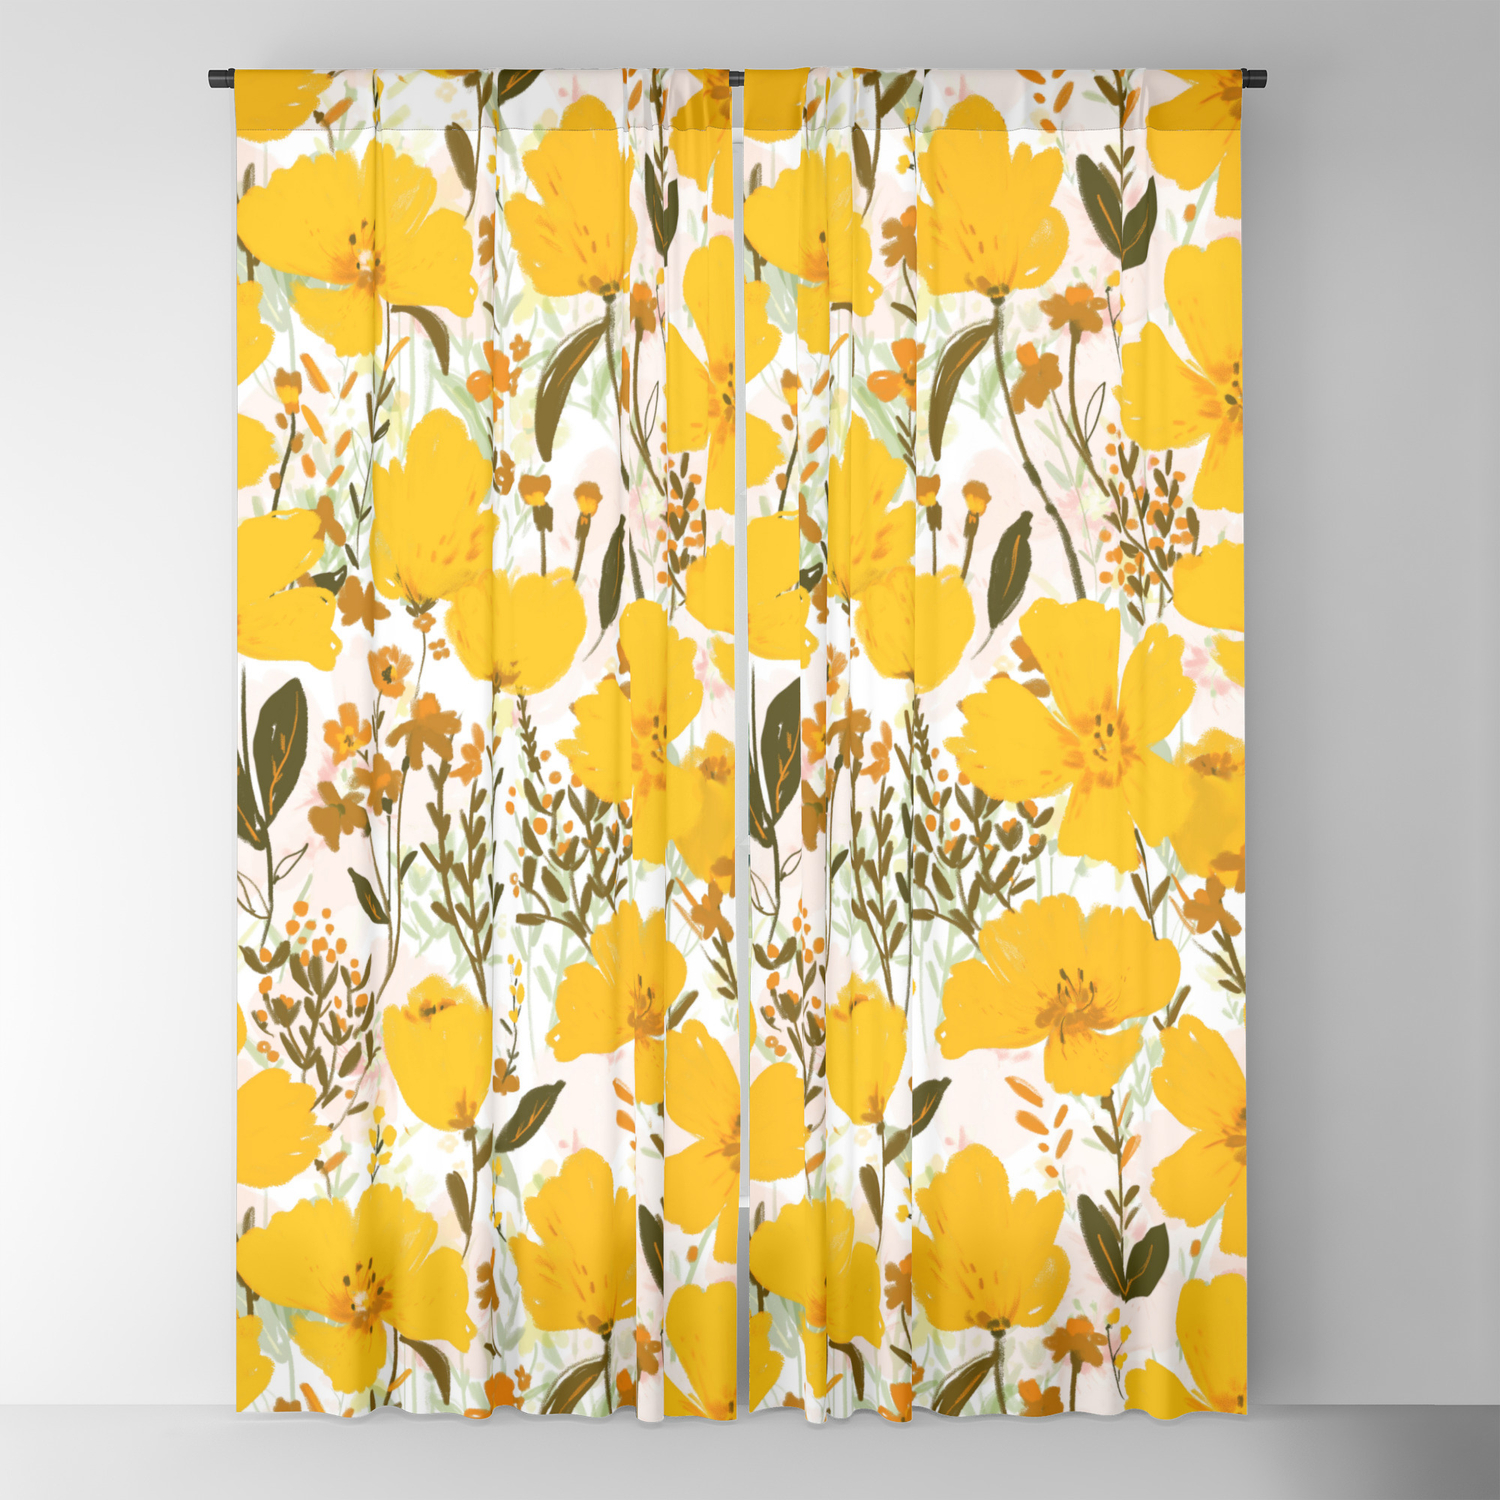 Society6 Yellow Roaming Wildflowers by Alison Janssen on Cotton Standard Set of 2 Pillow Sham 